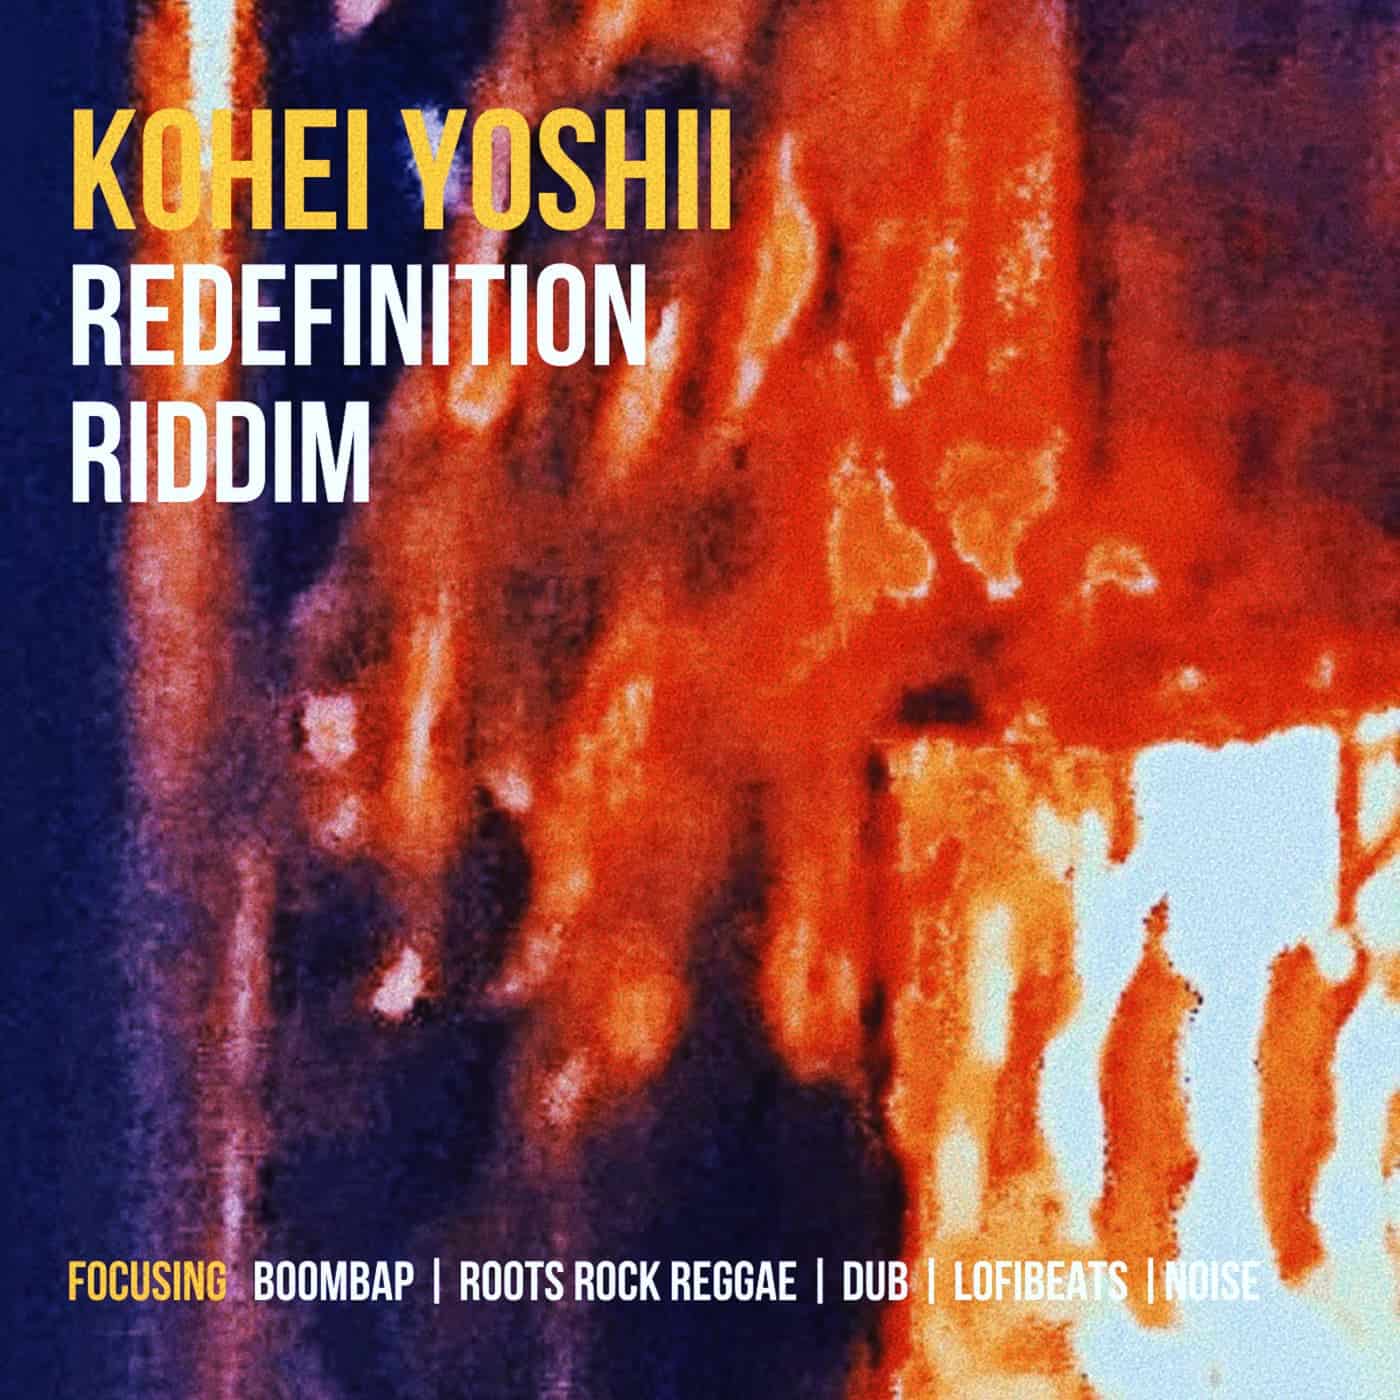 KOHEI YOSHII released “Redefinition Riddim” the single album from Force Energy Records